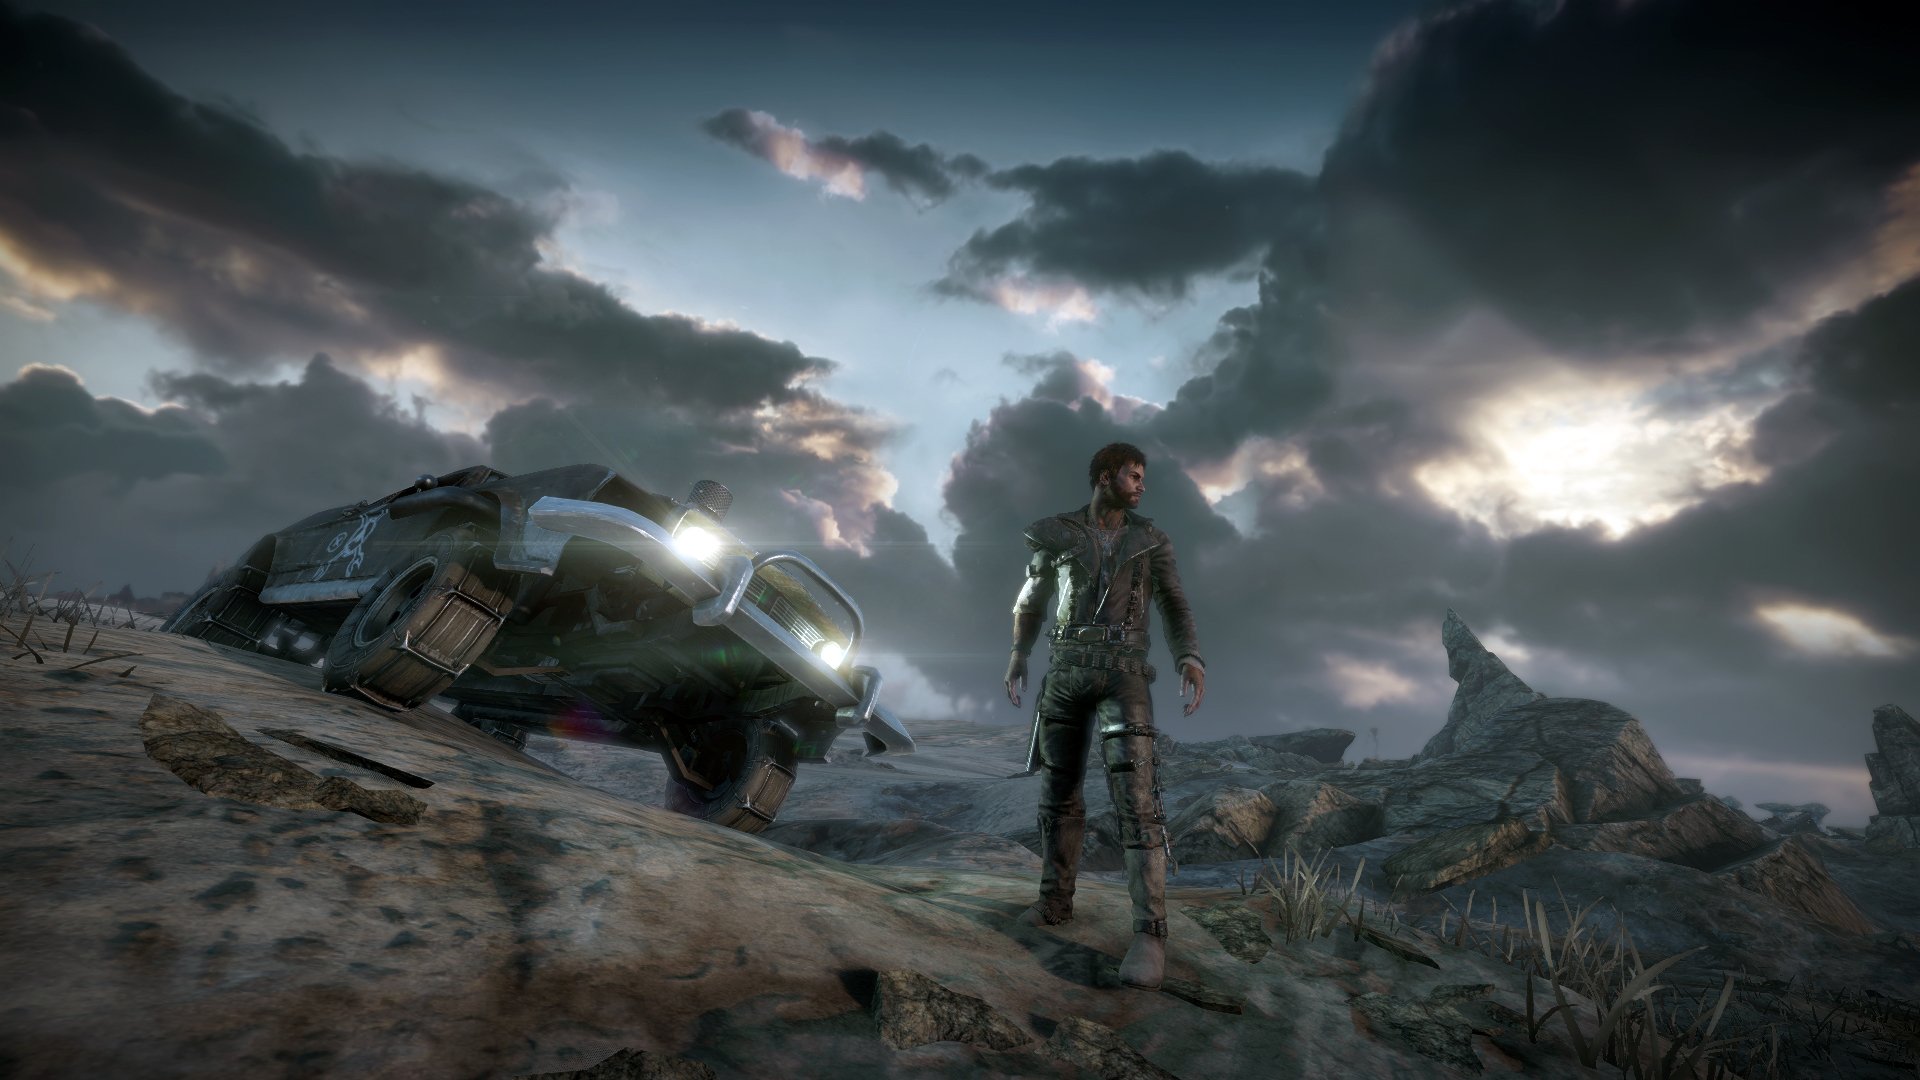 wallpaper details file name free mad max game wallpaper uploaded by